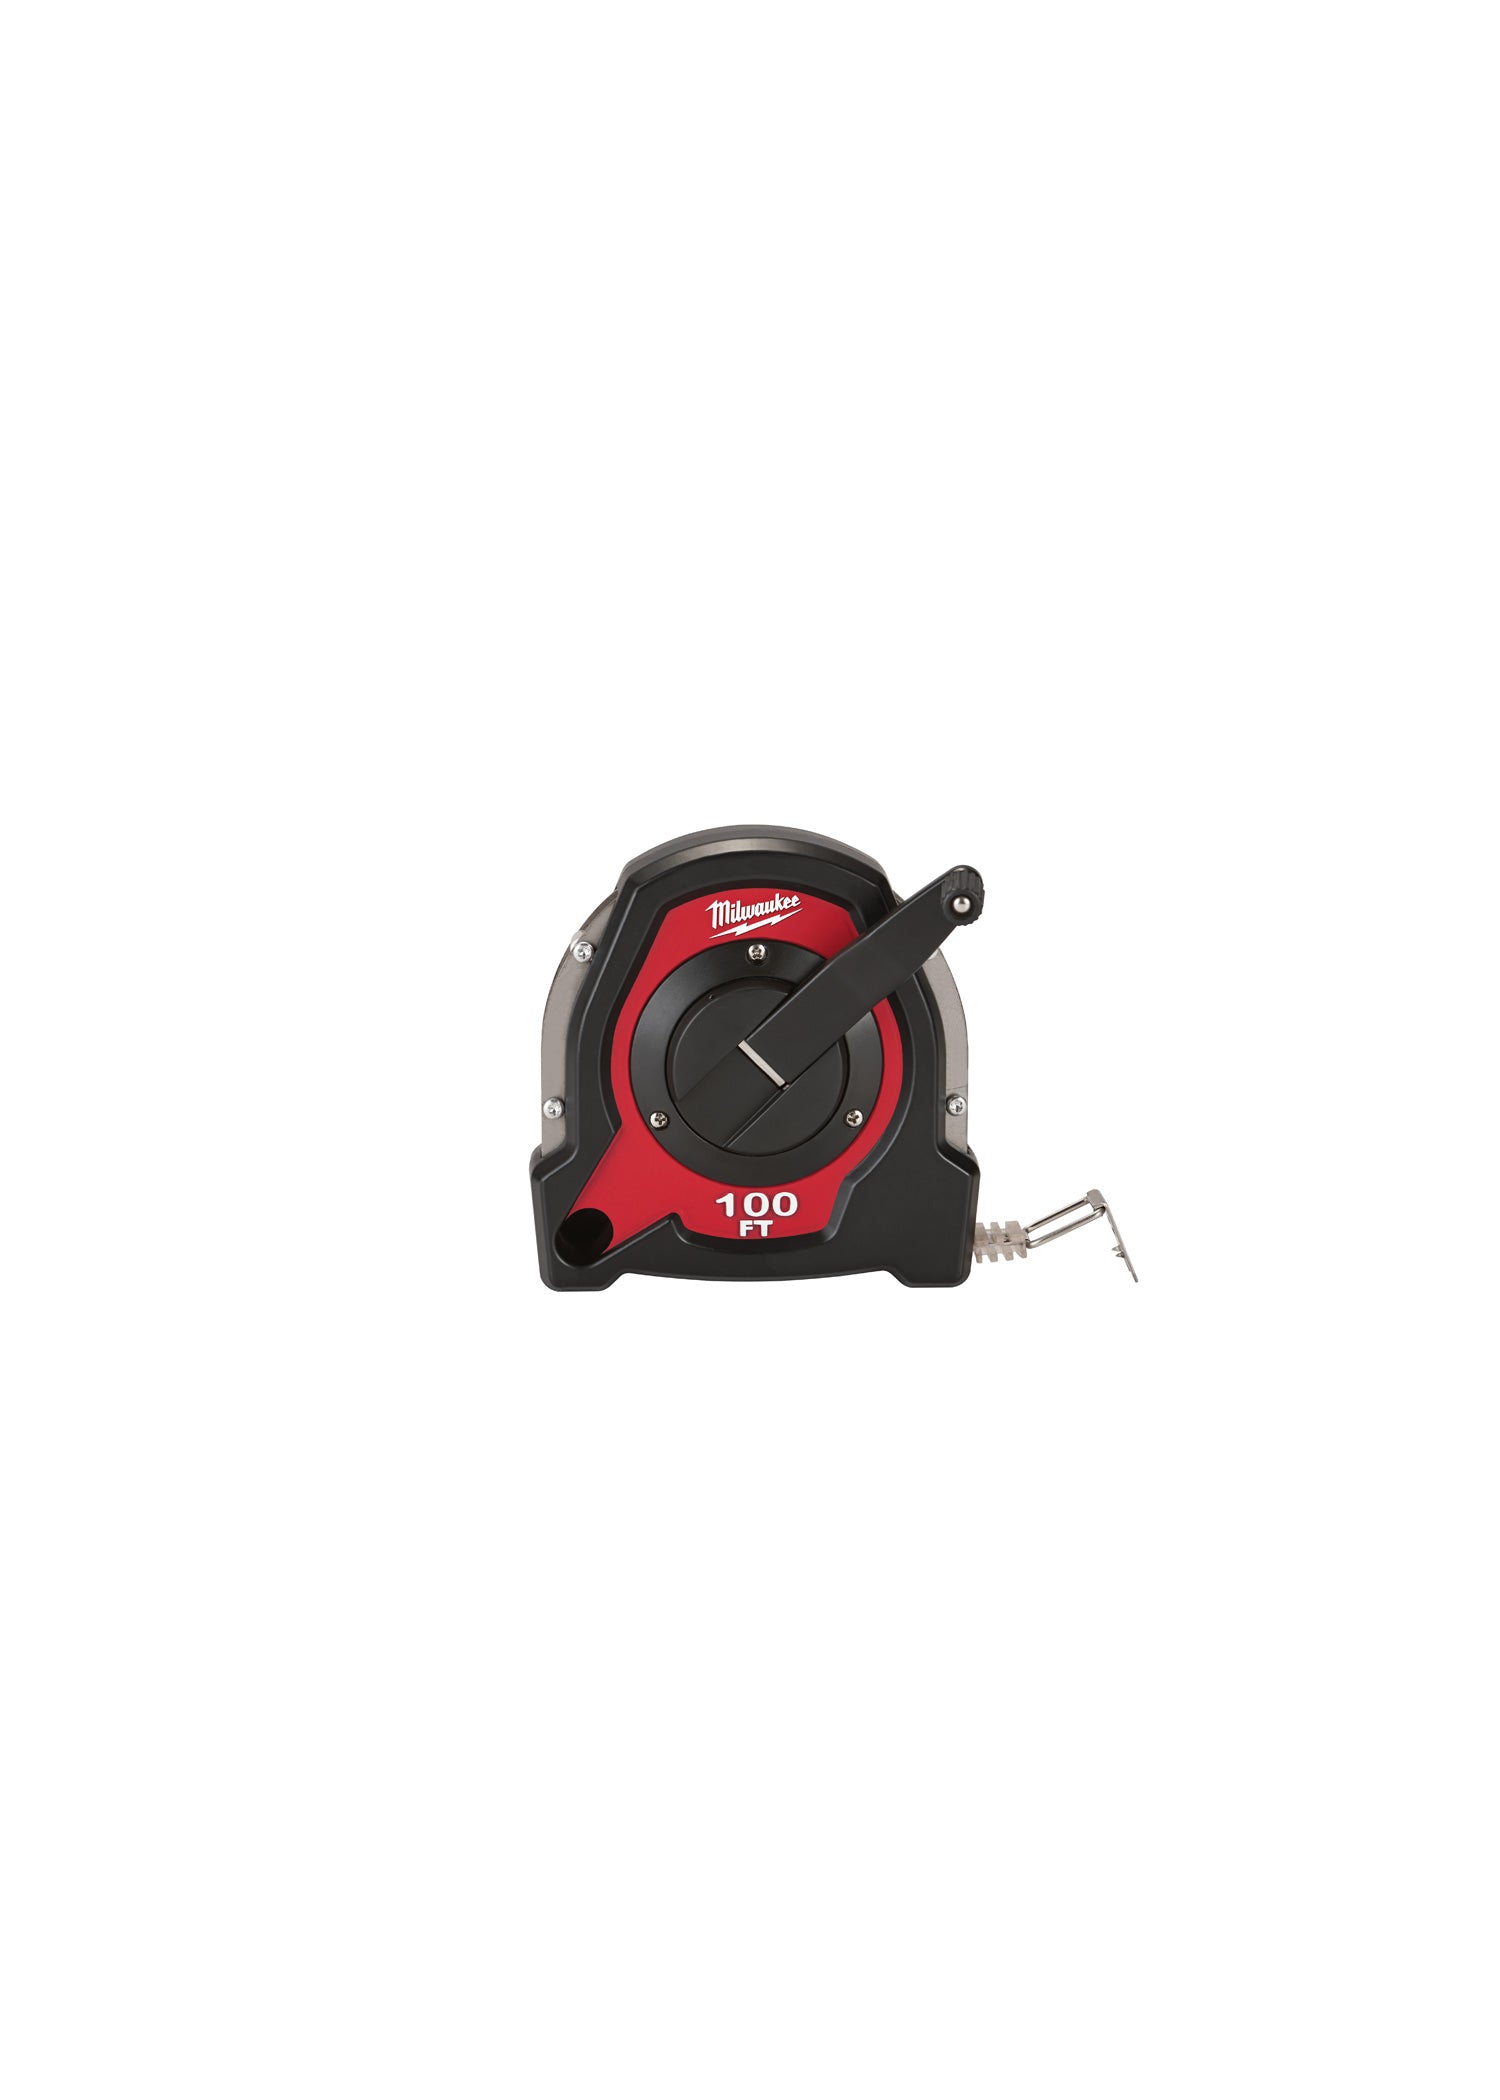 Milwaukee Electric Tool Corp, Milwaukee  100 ft. L x 1.5 in. W Closed Reel  Long Tape Measure  Red  1 pk